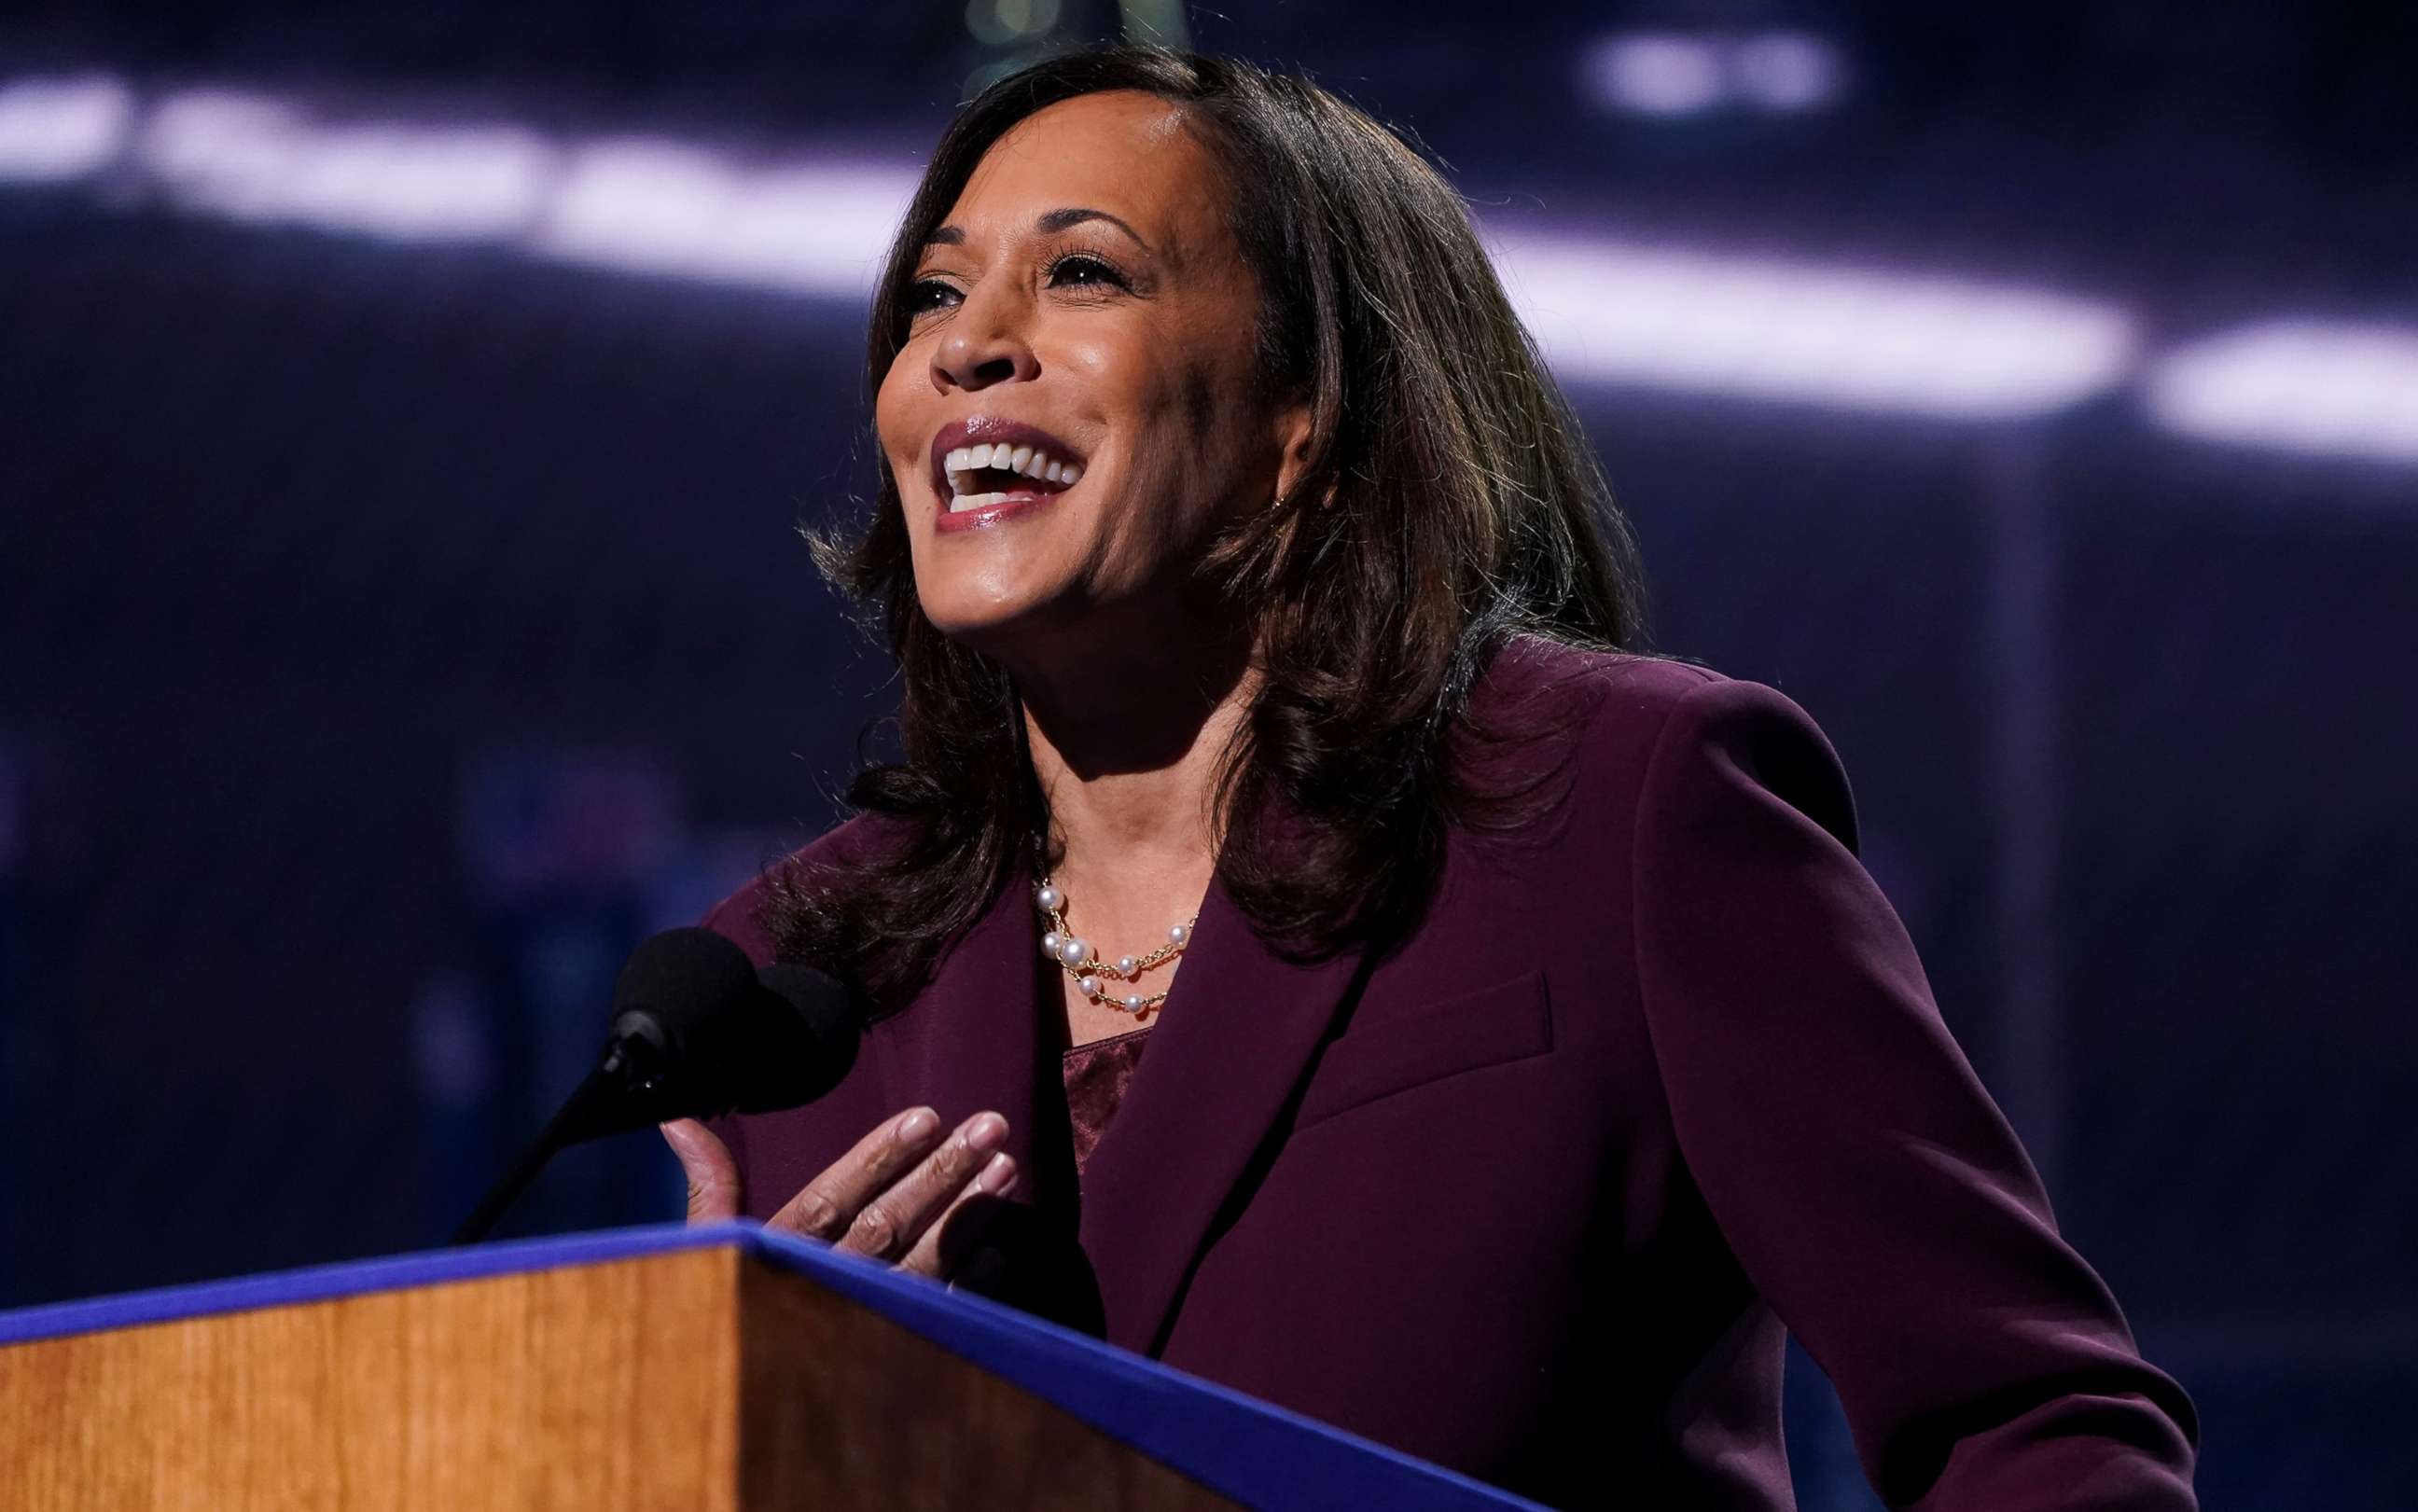 PHOTO: Senator Kamala Harris accepts the Democratic vice presidential nomination during her speech delivered for the largely virtual 2020 Democratic National Convention from the Chase Center in Wilmington, Del., Aug. 19, 2020.